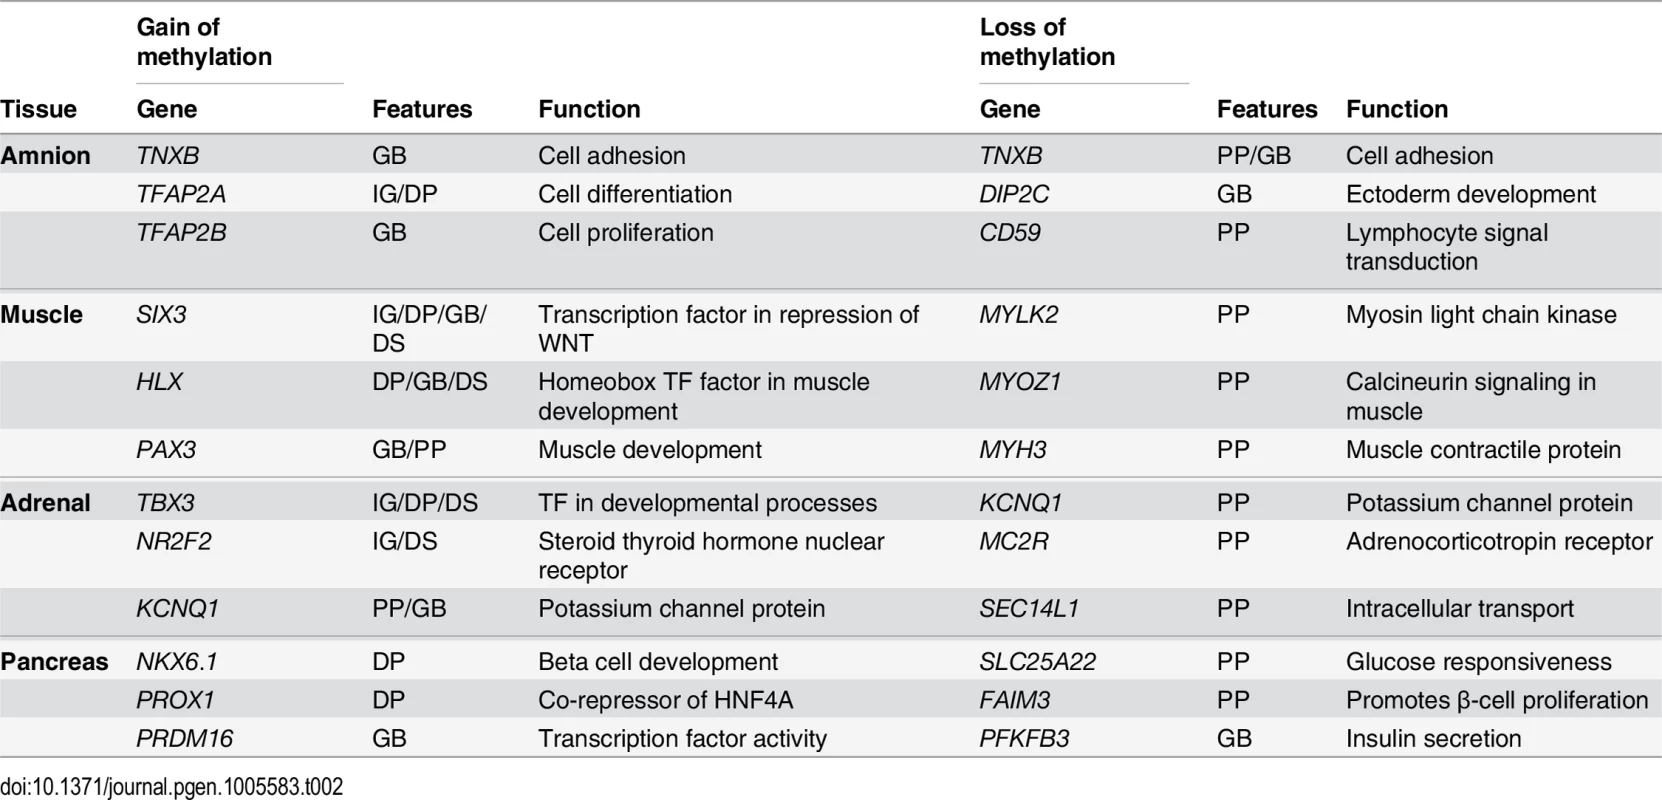 Table with six genes per tissue highlighting the tissue specificity of the genes found near dDMRs with a loss of methylation as well as the association of dDMRs with a gain of methylation with tissue-specific developmental genes.